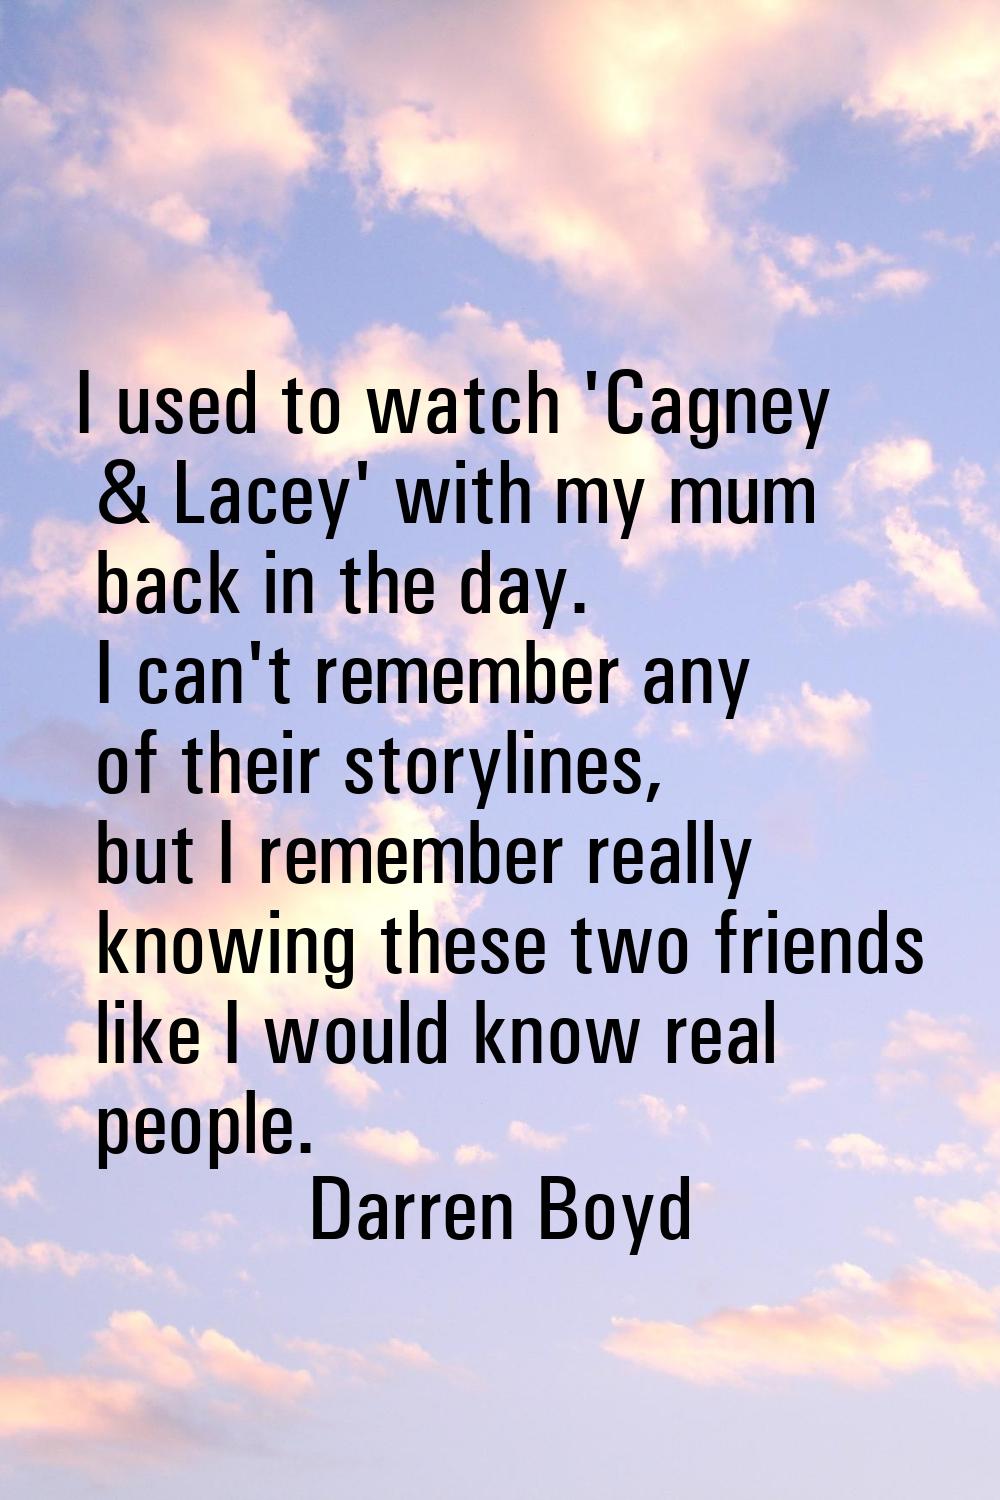 I used to watch 'Cagney & Lacey' with my mum back in the day. I can't remember any of their storyli